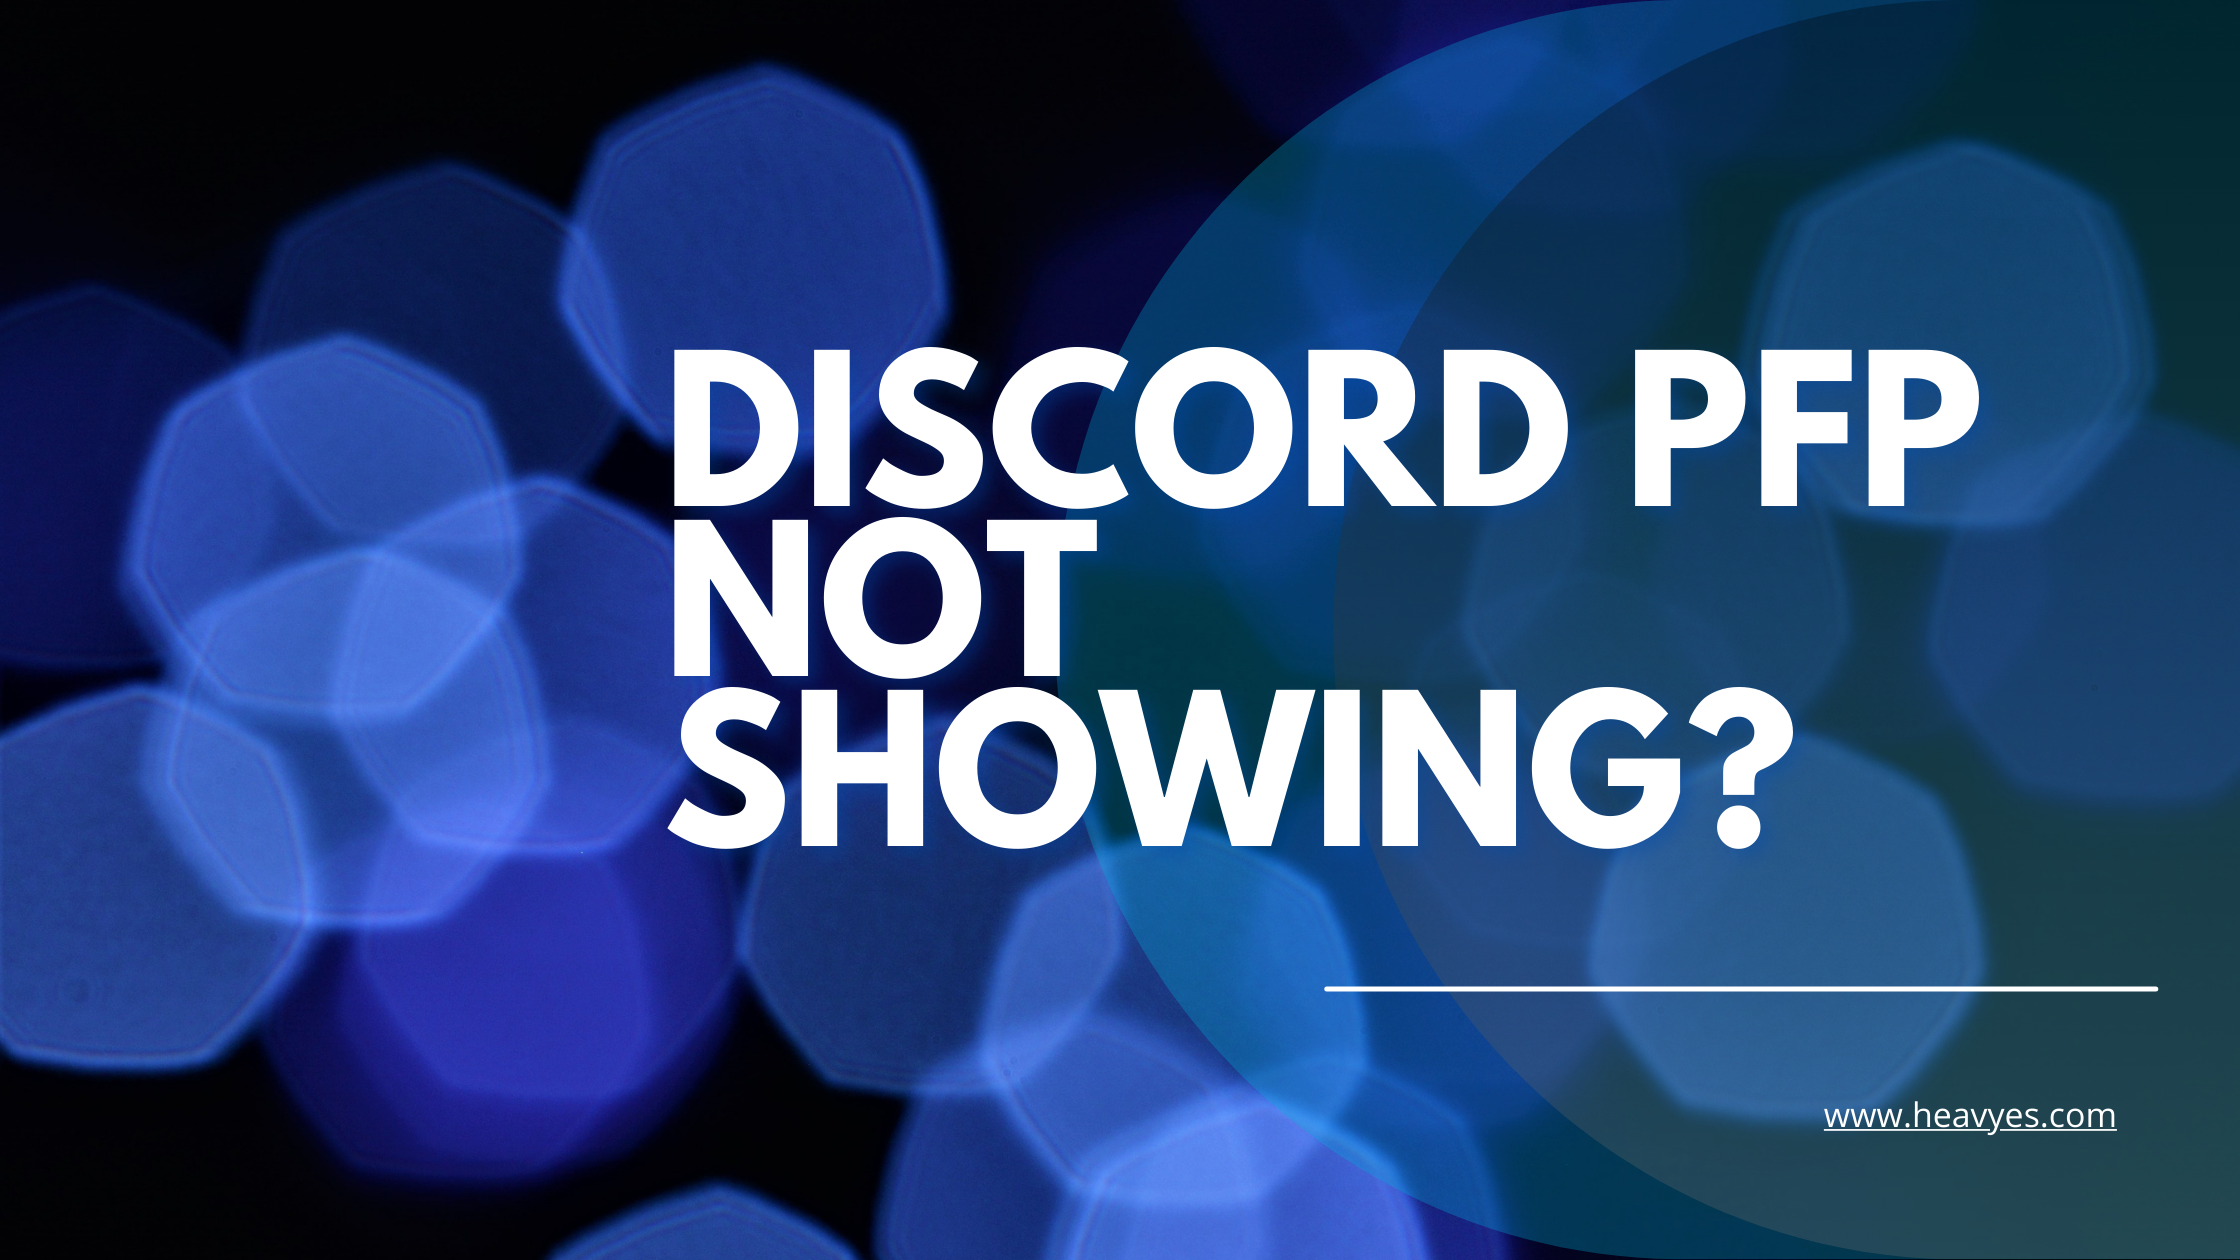 How To Fix Discord PFP Not Showing On Android